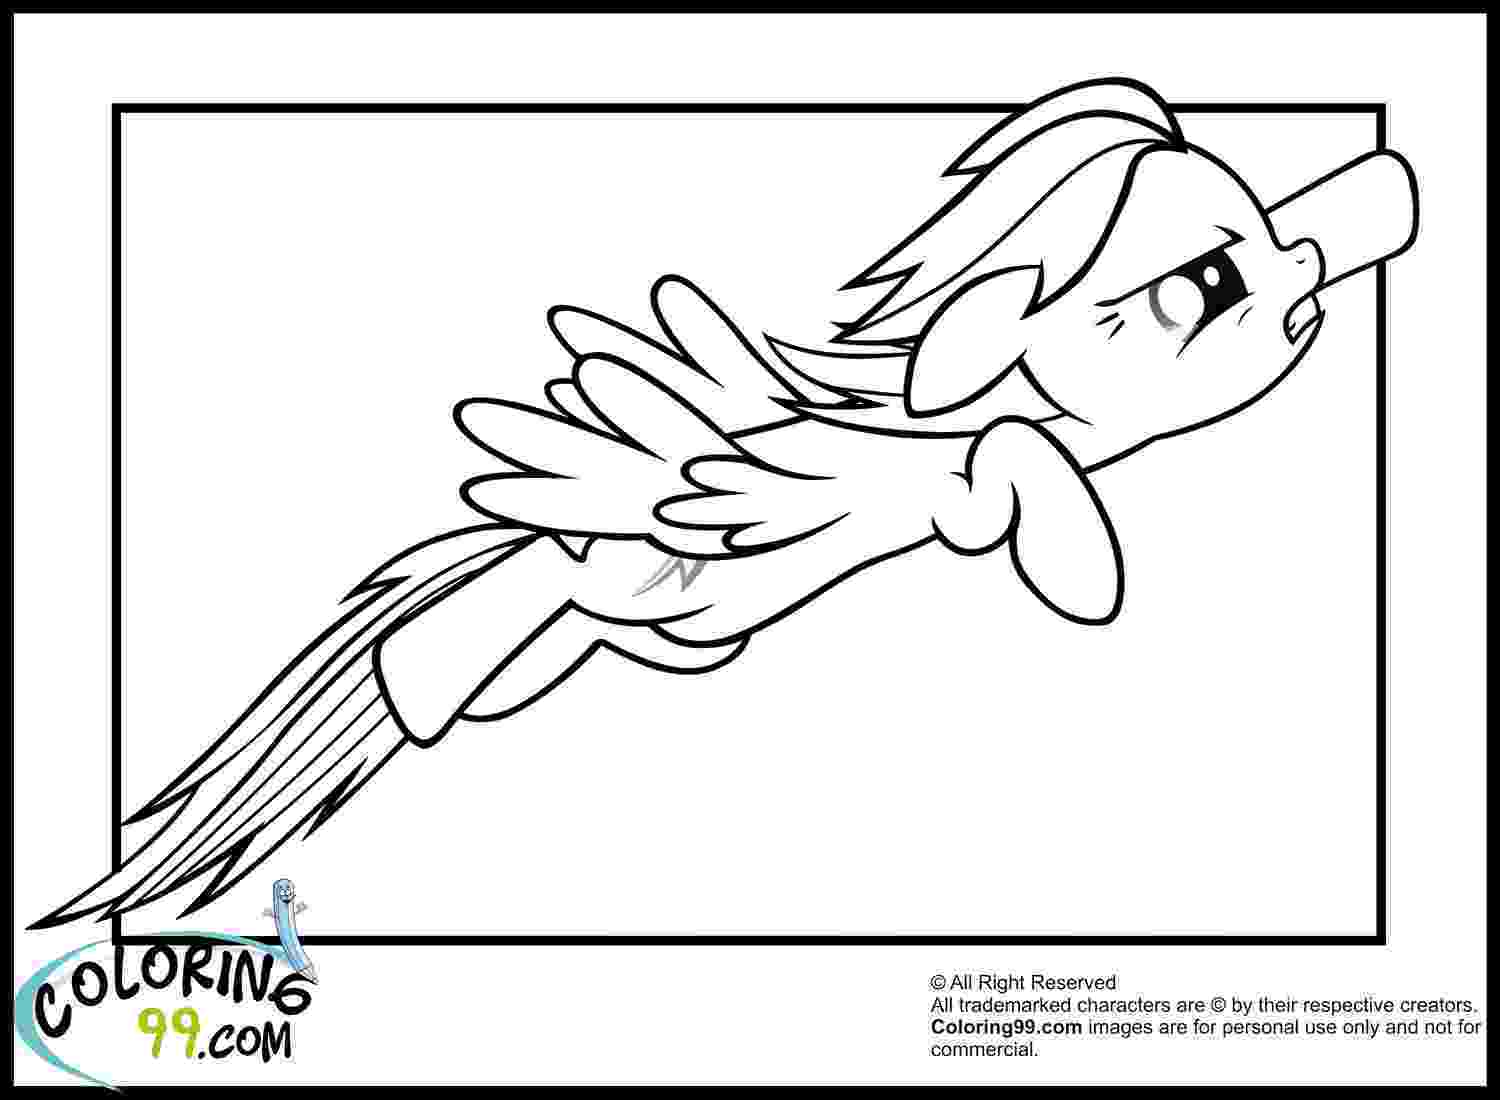 my little pony coloring pages rainbow dash my little pony rainbow dash coloring pages free download pony dash rainbow little pages my coloring 